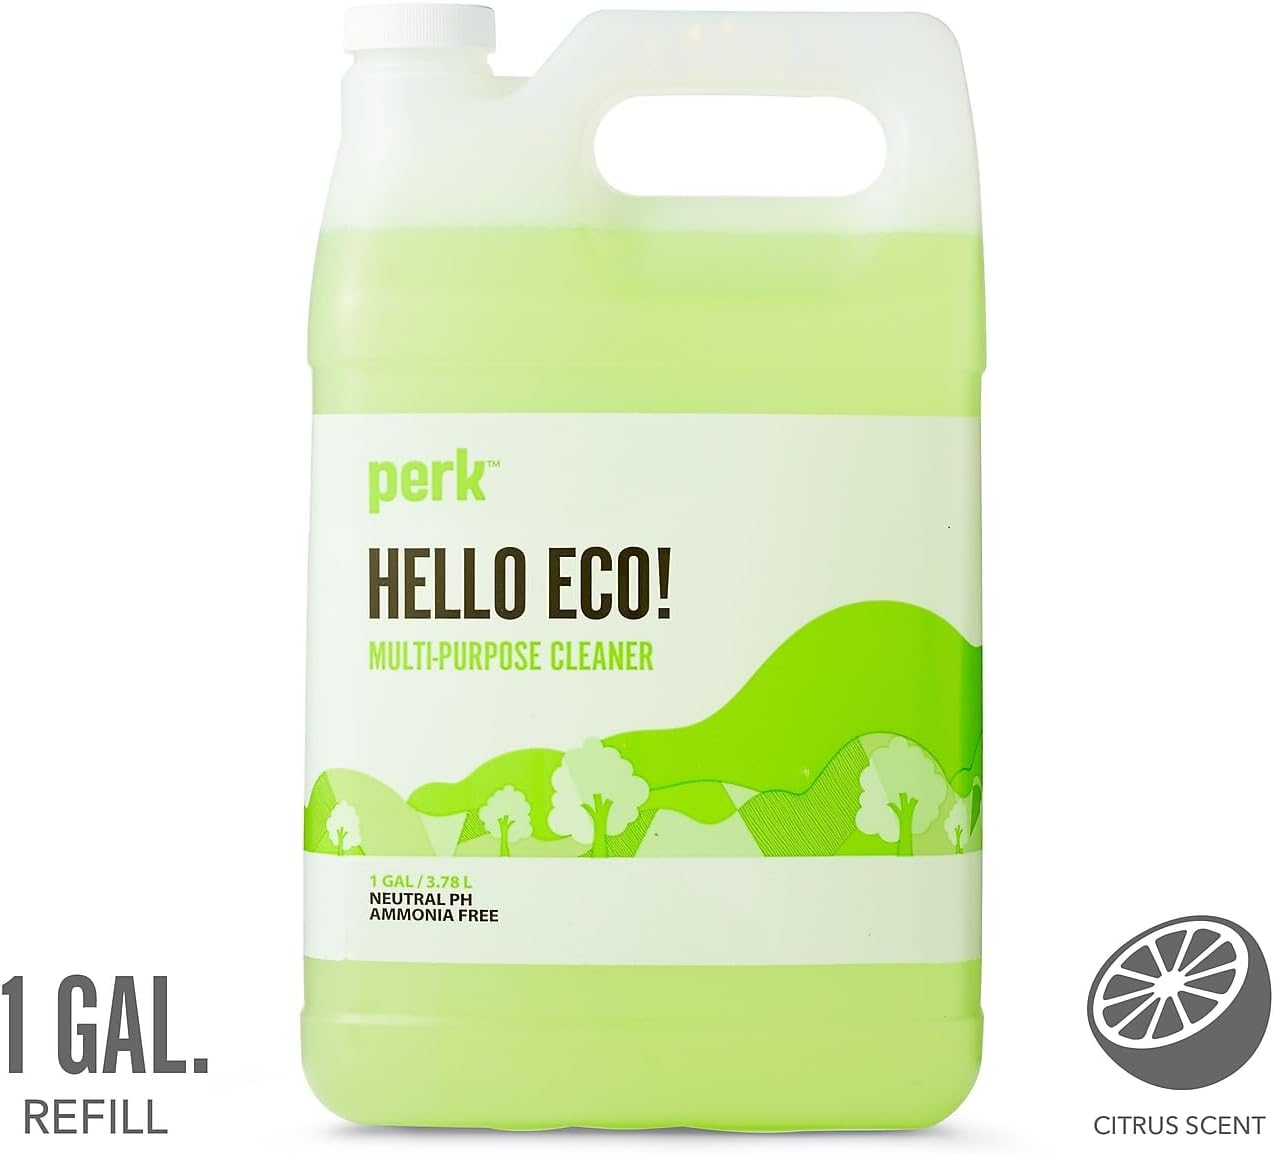 sustainable earth 807721 all purpose cleaner refill ready to use 1 gallon seb641001 a cc 2